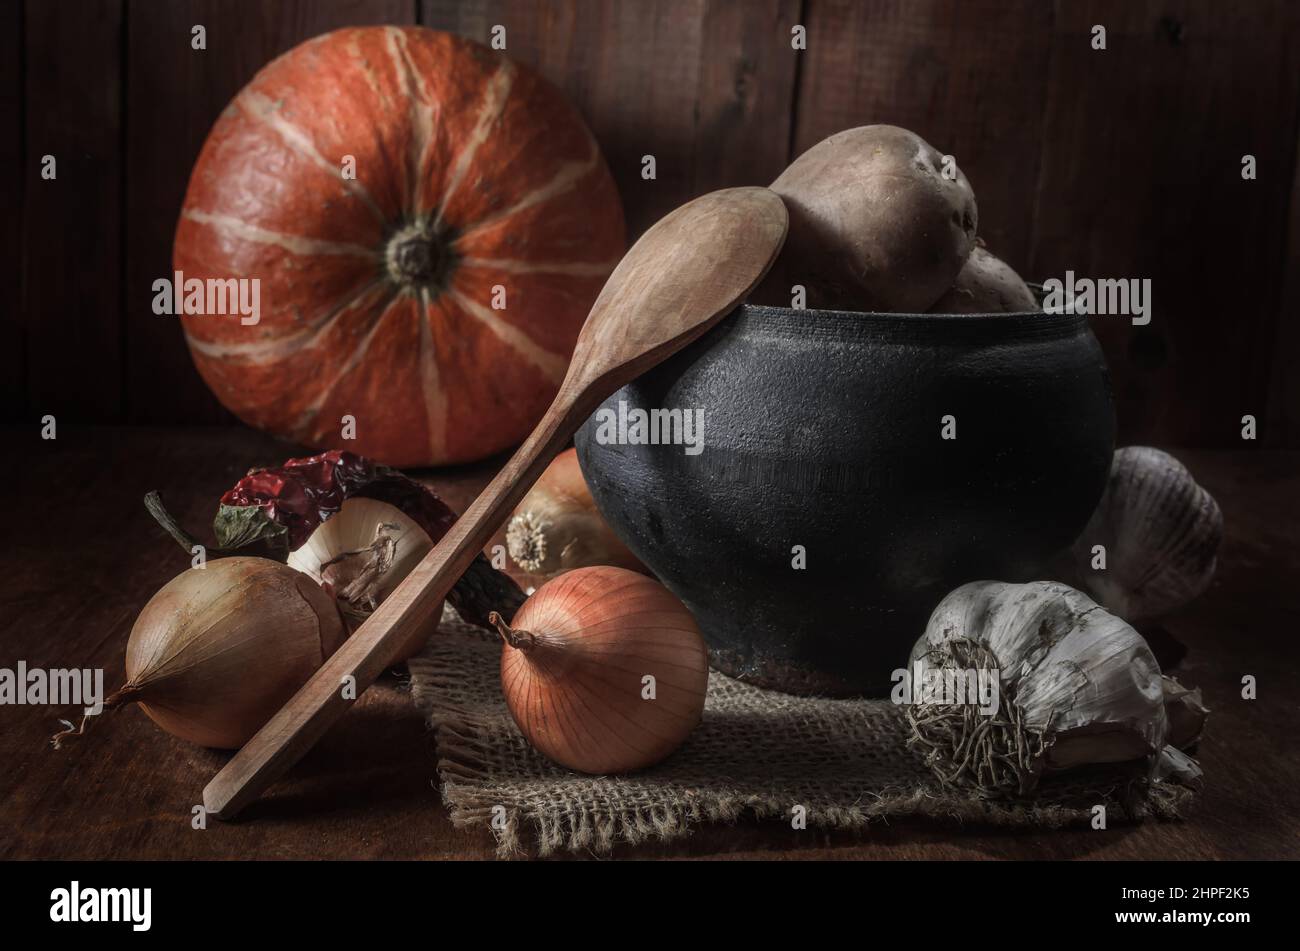 potatoes and other vegetables on a dark wooden background Stock Photo